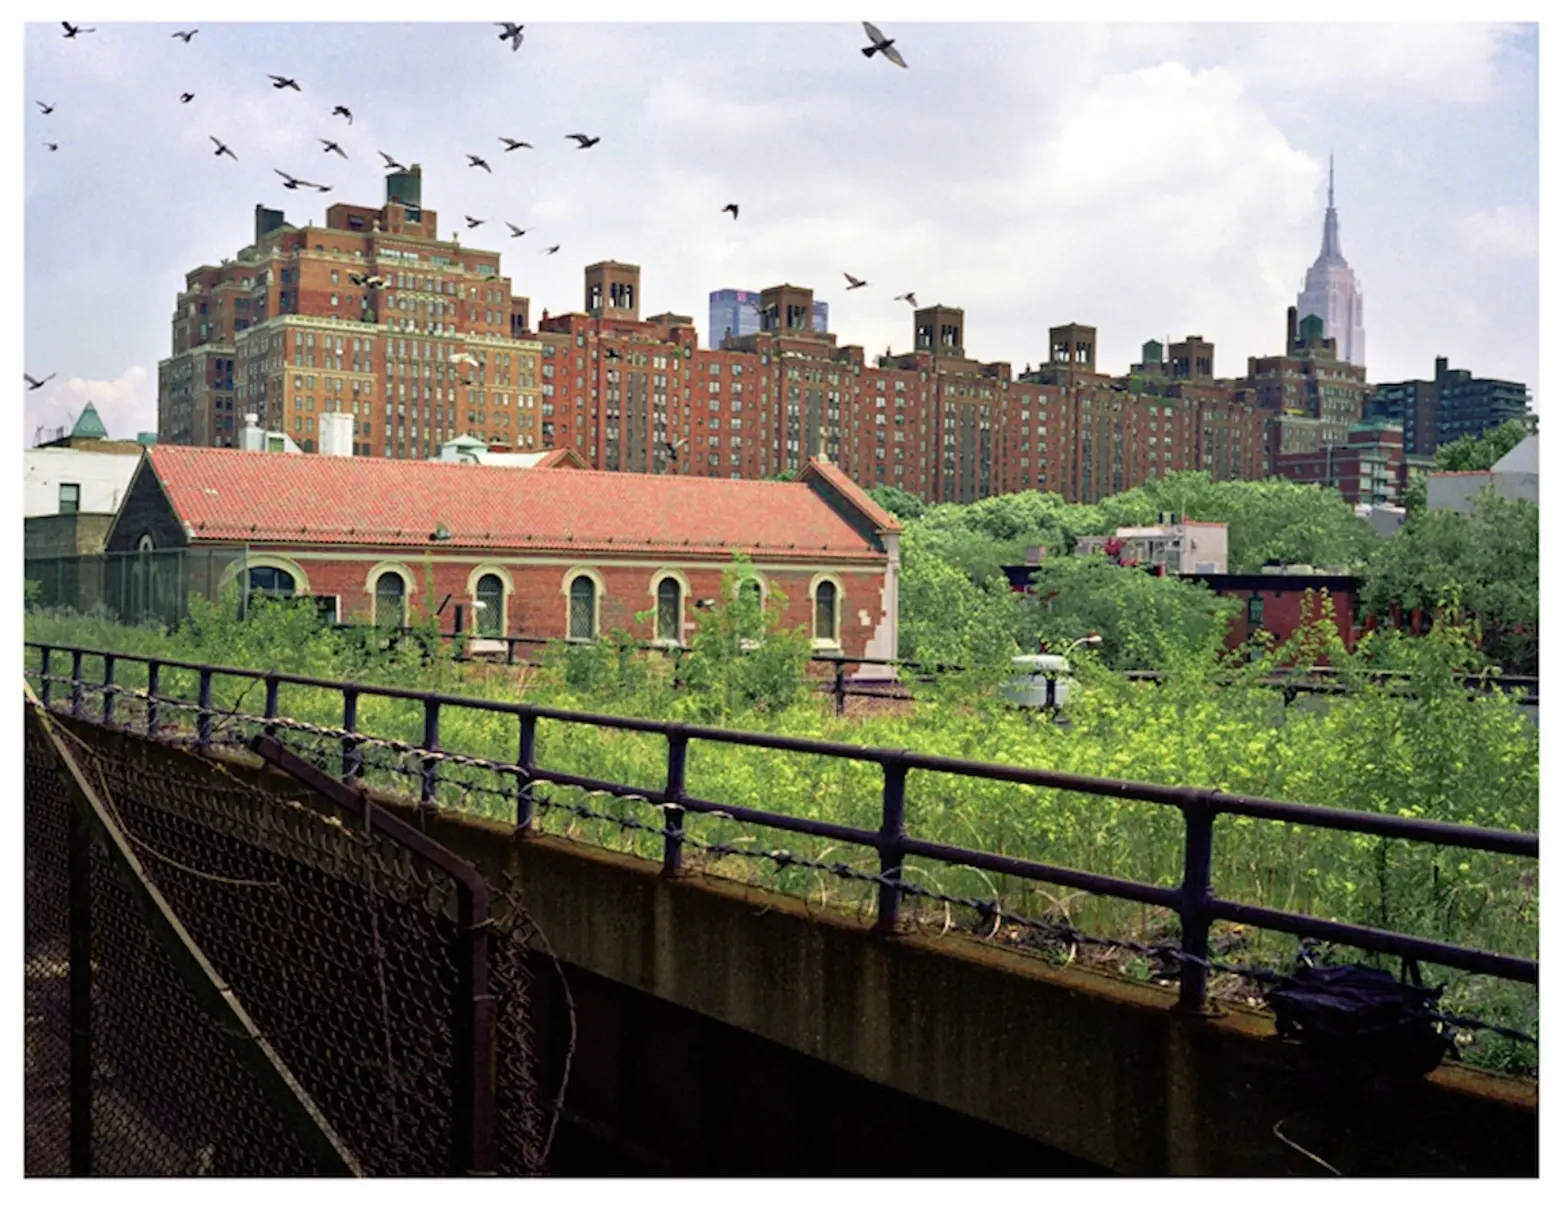 PHOTOS: See an abandoned High Line before its days as a public park